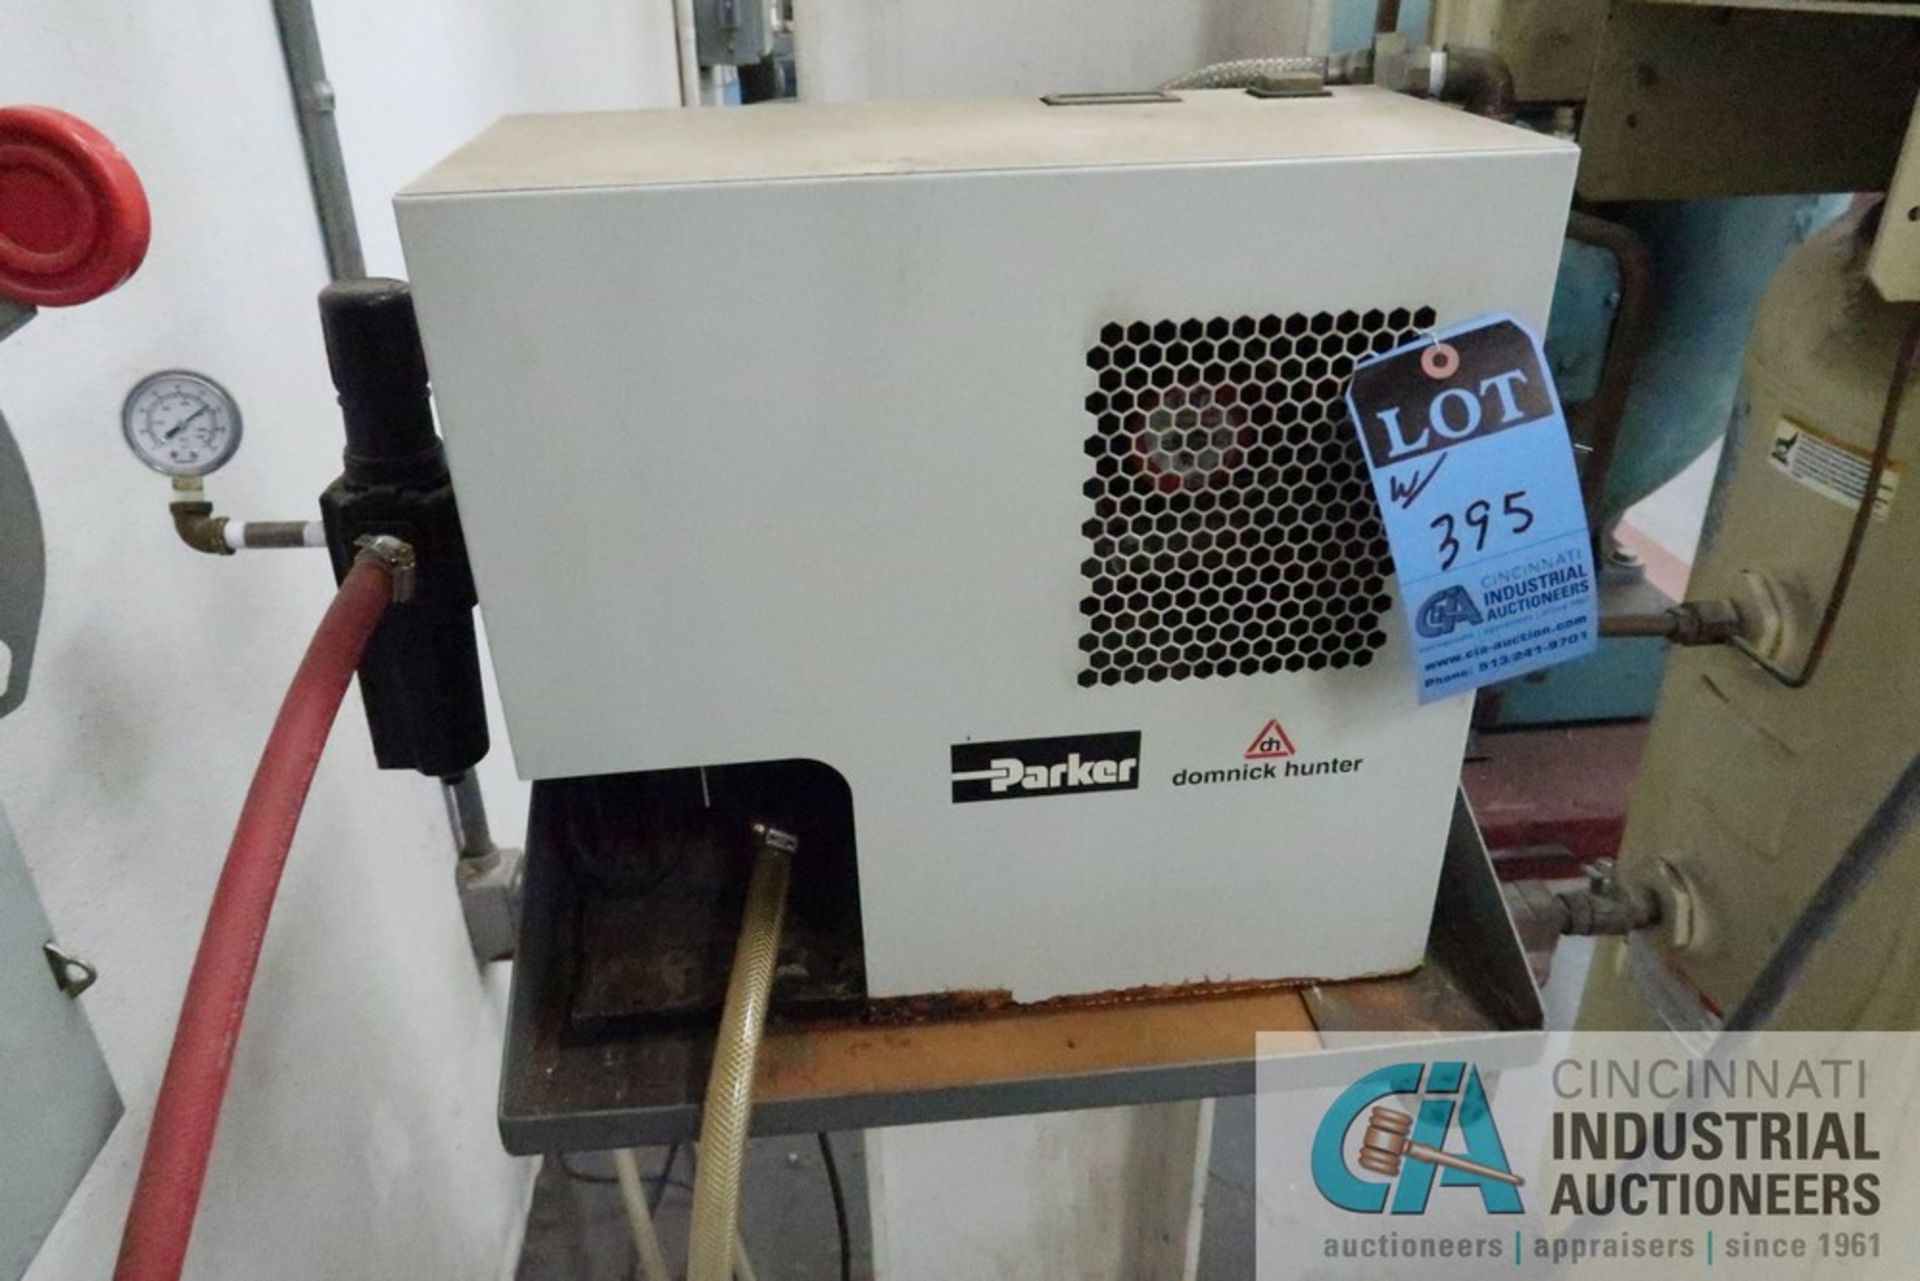 5-HP INGERSOLL RAND 2475 VERTICAL TANK AIR COMPRESSOR W/ DOMINICK AIR DRYER - Image 7 of 8